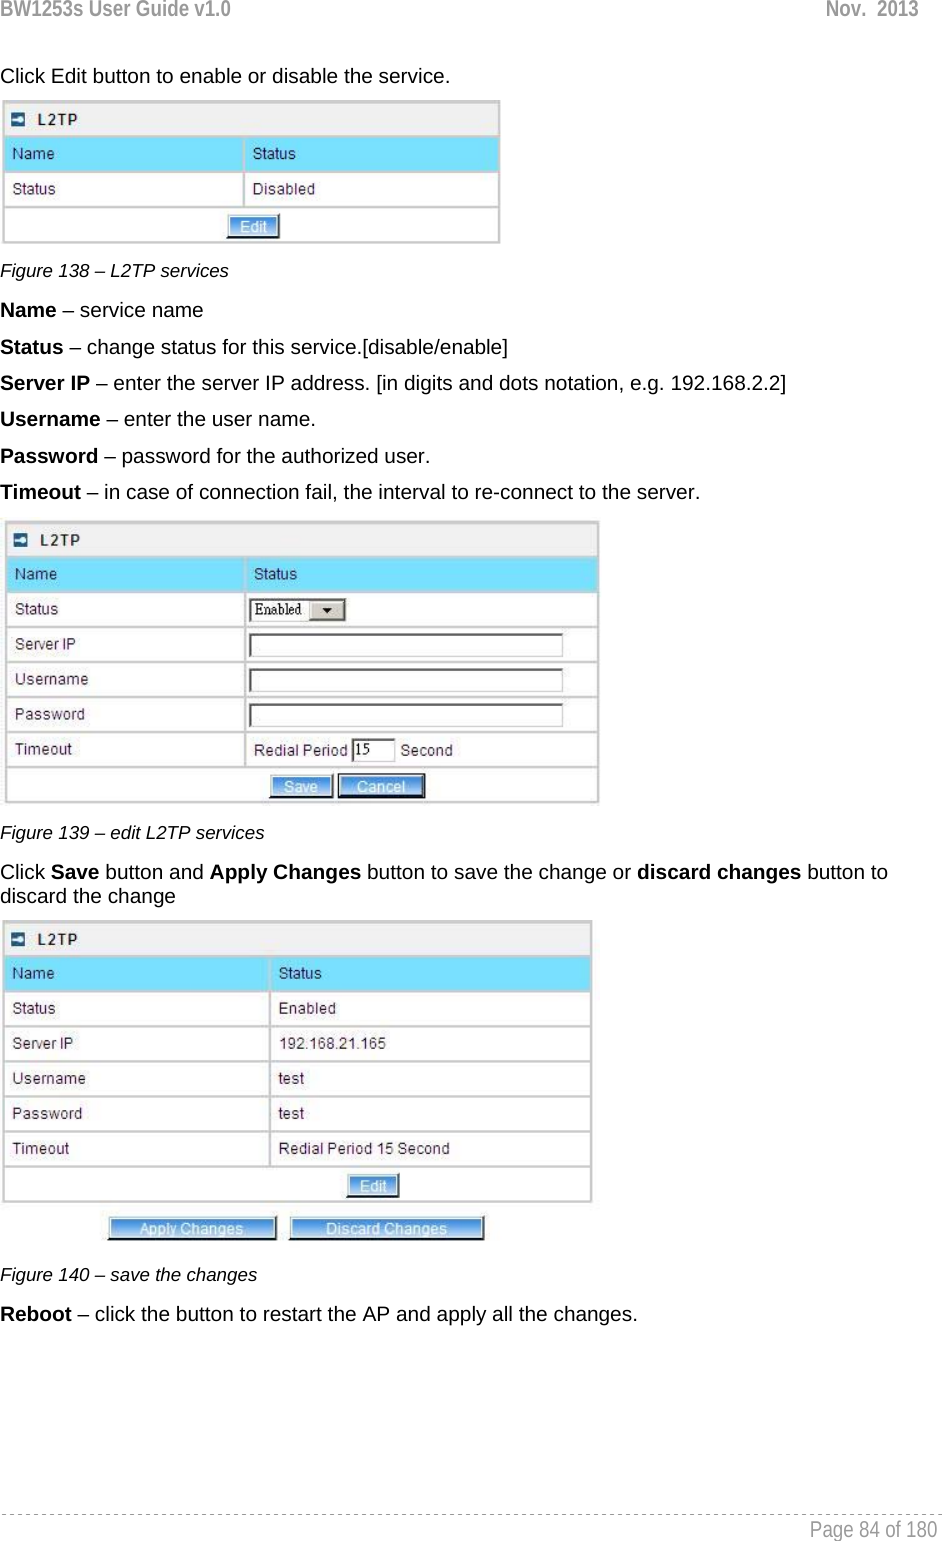 BW1253s User Guide v1.0  Nov.  2013     Page 84 of 180   Click Edit button to enable or disable the service.  Figure 138 – L2TP services Name – service name Status – change status for this service.[disable/enable] Server IP – enter the server IP address. [in digits and dots notation, e.g. 192.168.2.2] Username – enter the user name. Password – password for the authorized user. Timeout – in case of connection fail, the interval to re-connect to the server.  Figure 139 – edit L2TP services Click Save button and Apply Changes button to save the change or discard changes button to discard the change  Figure 140 – save the changes Reboot – click the button to restart the AP and apply all the changes. 